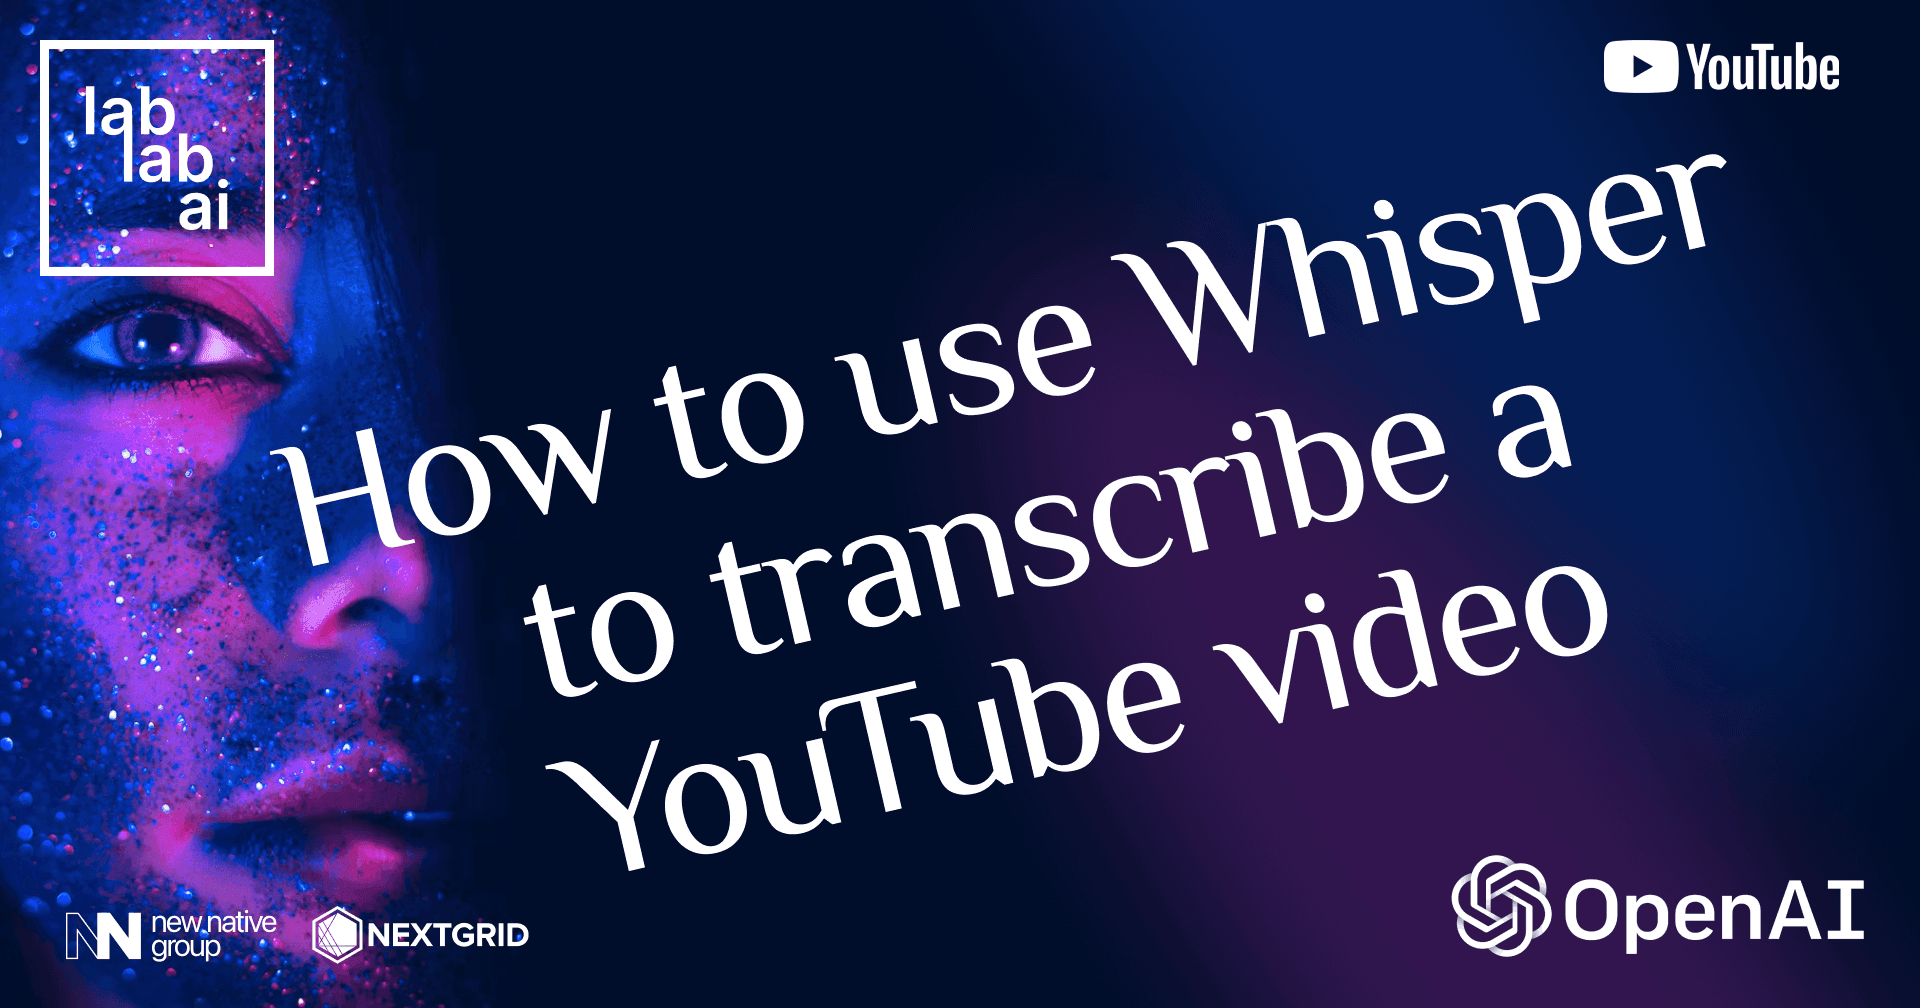 OpenAI Whisper tutorial: How to use Whisper to transcribe a YouTube video tutorial